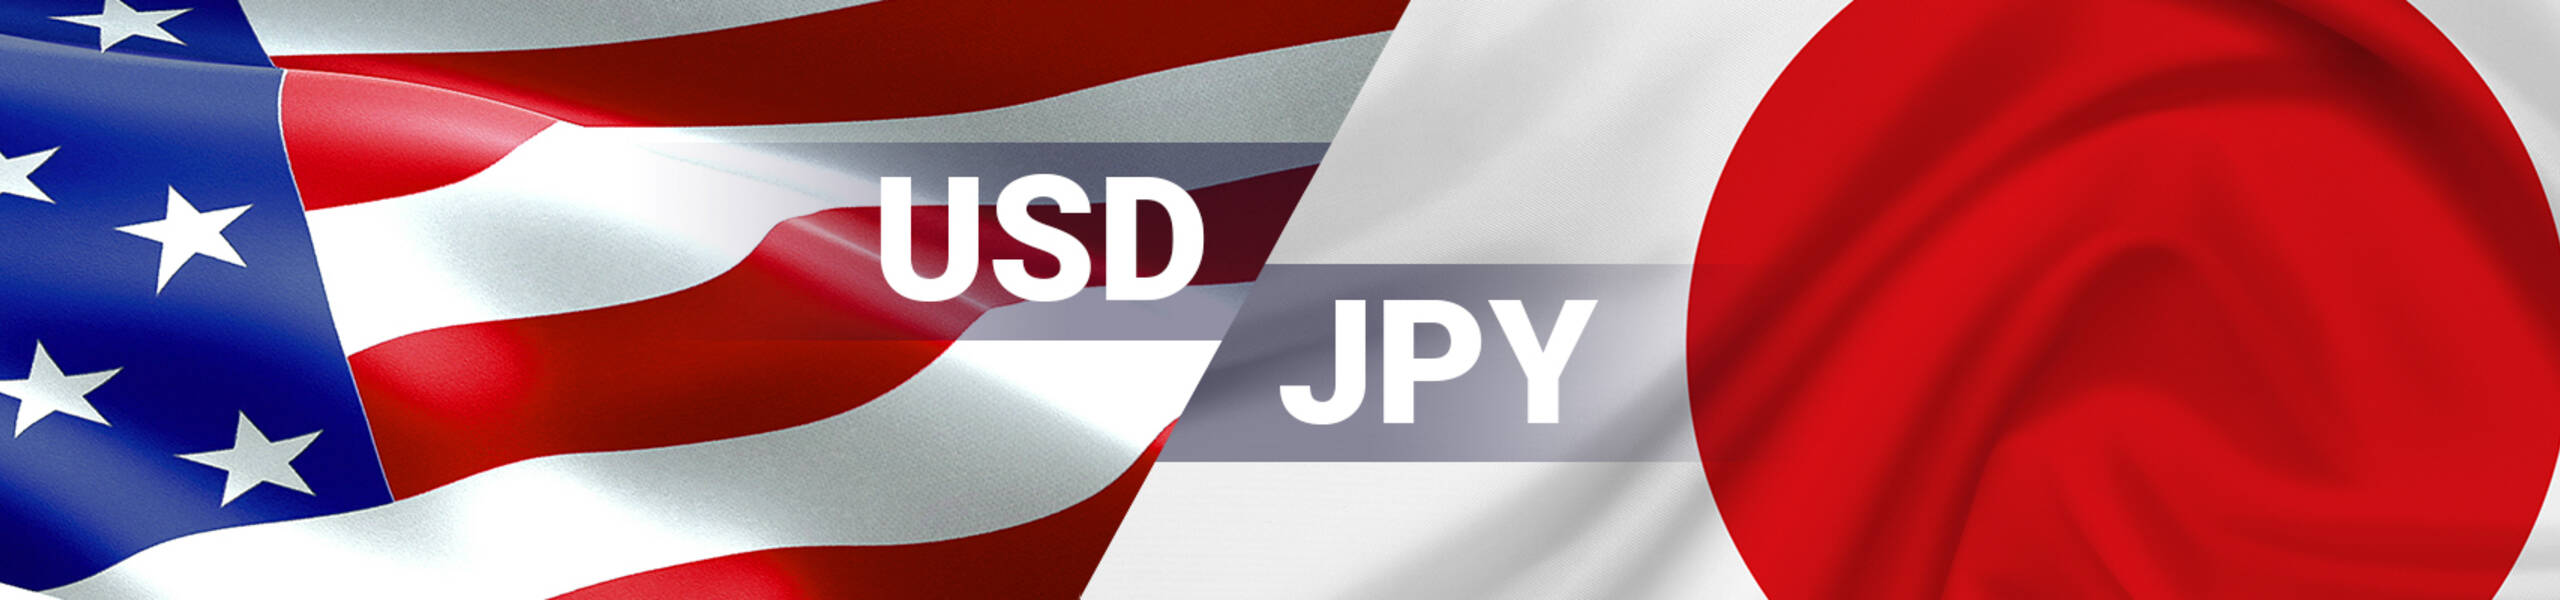 USD/JPY reached sell target 109.00